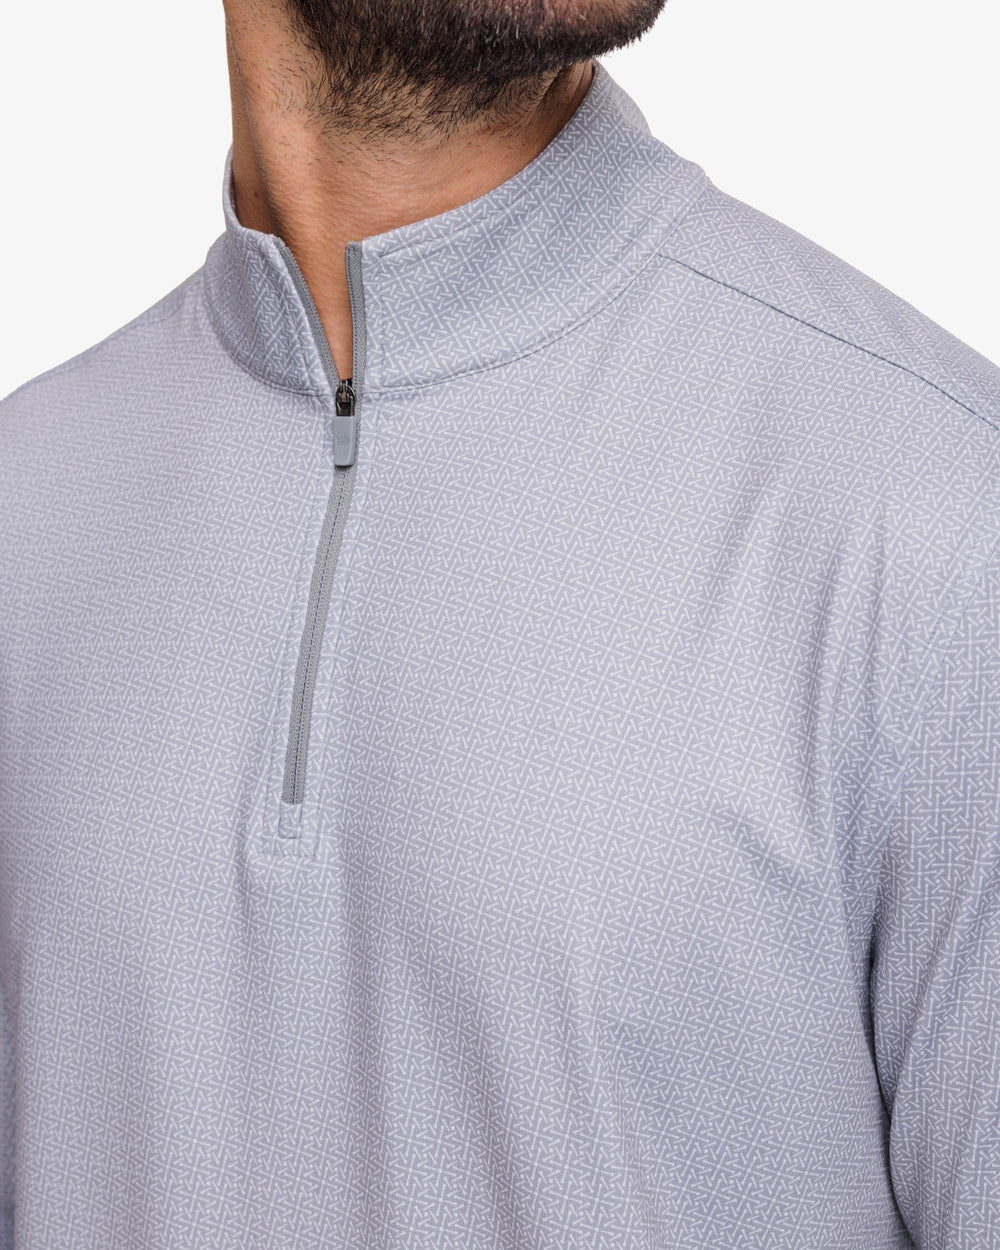 The detail view of the Southern Tide Pine Ridge Print Cruiser Quarter Zip Pullover by Southern Tide - Steel Grey